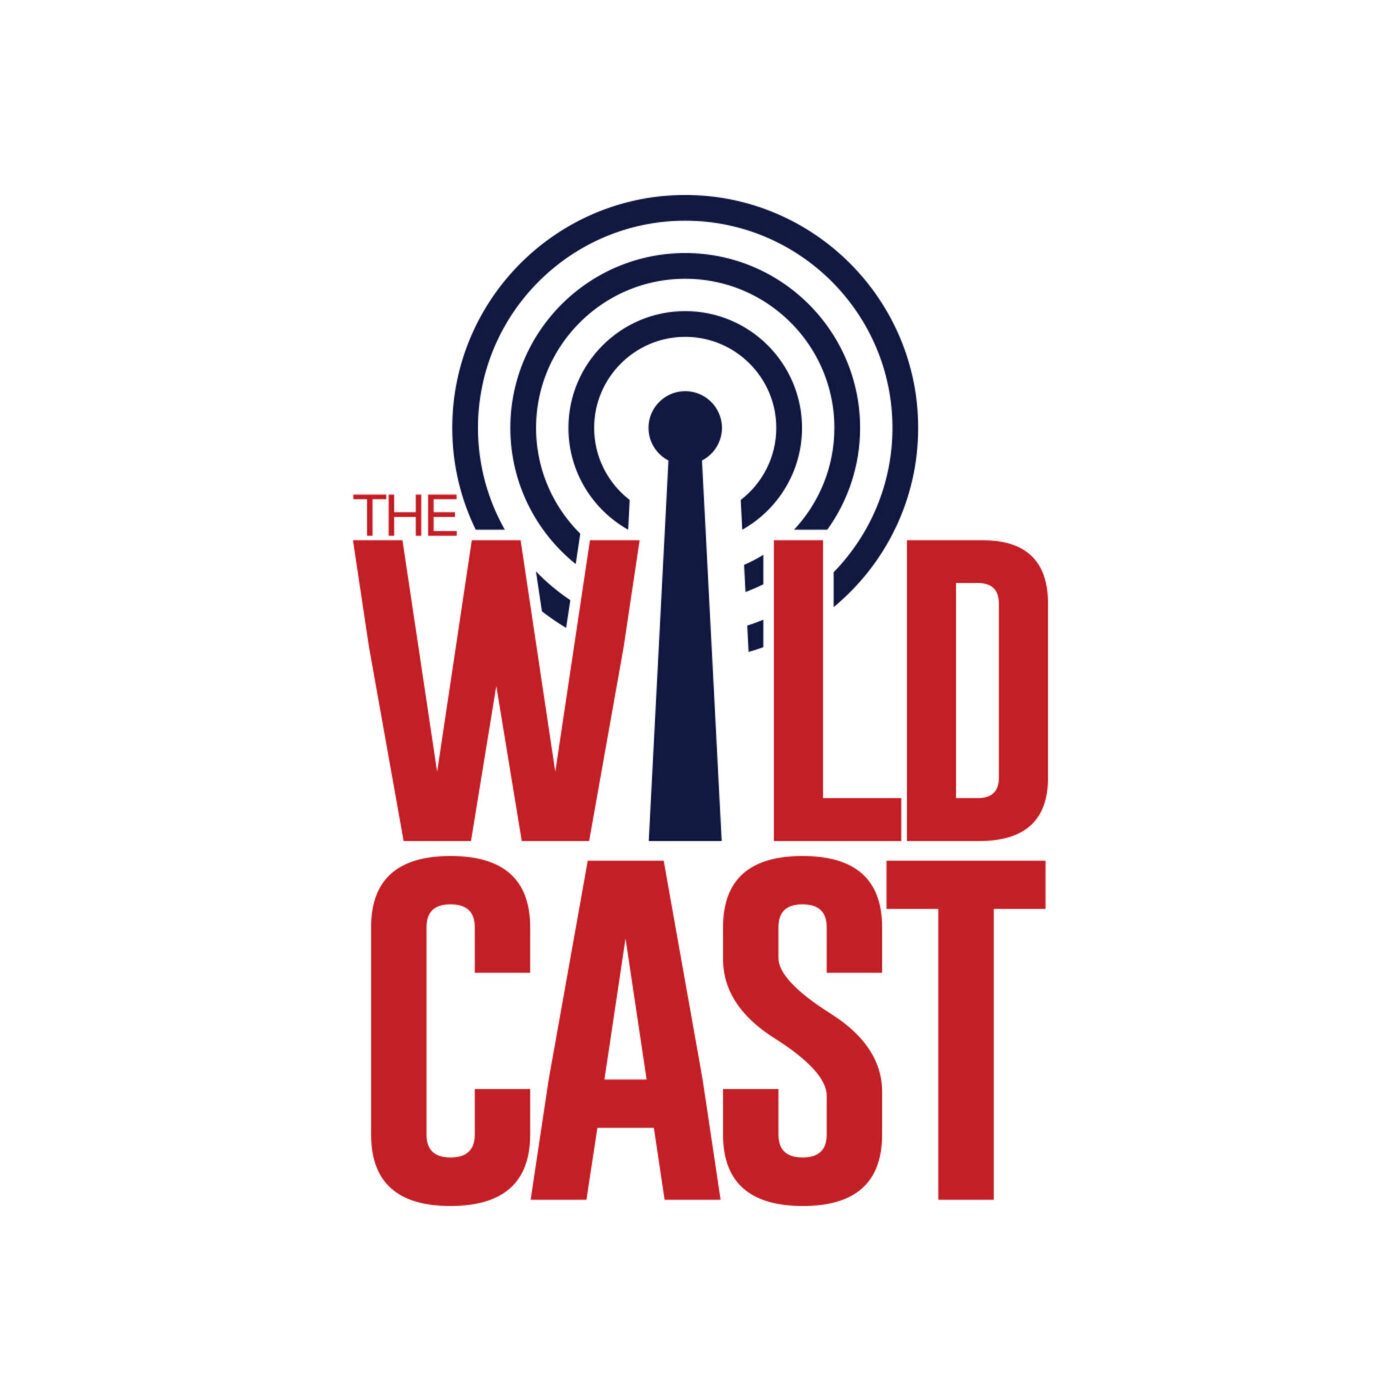 The Wildcast (Bonus): Jamarye Joiner on his Arizona career, relationship with RichRod, and his position at Jacksonville State